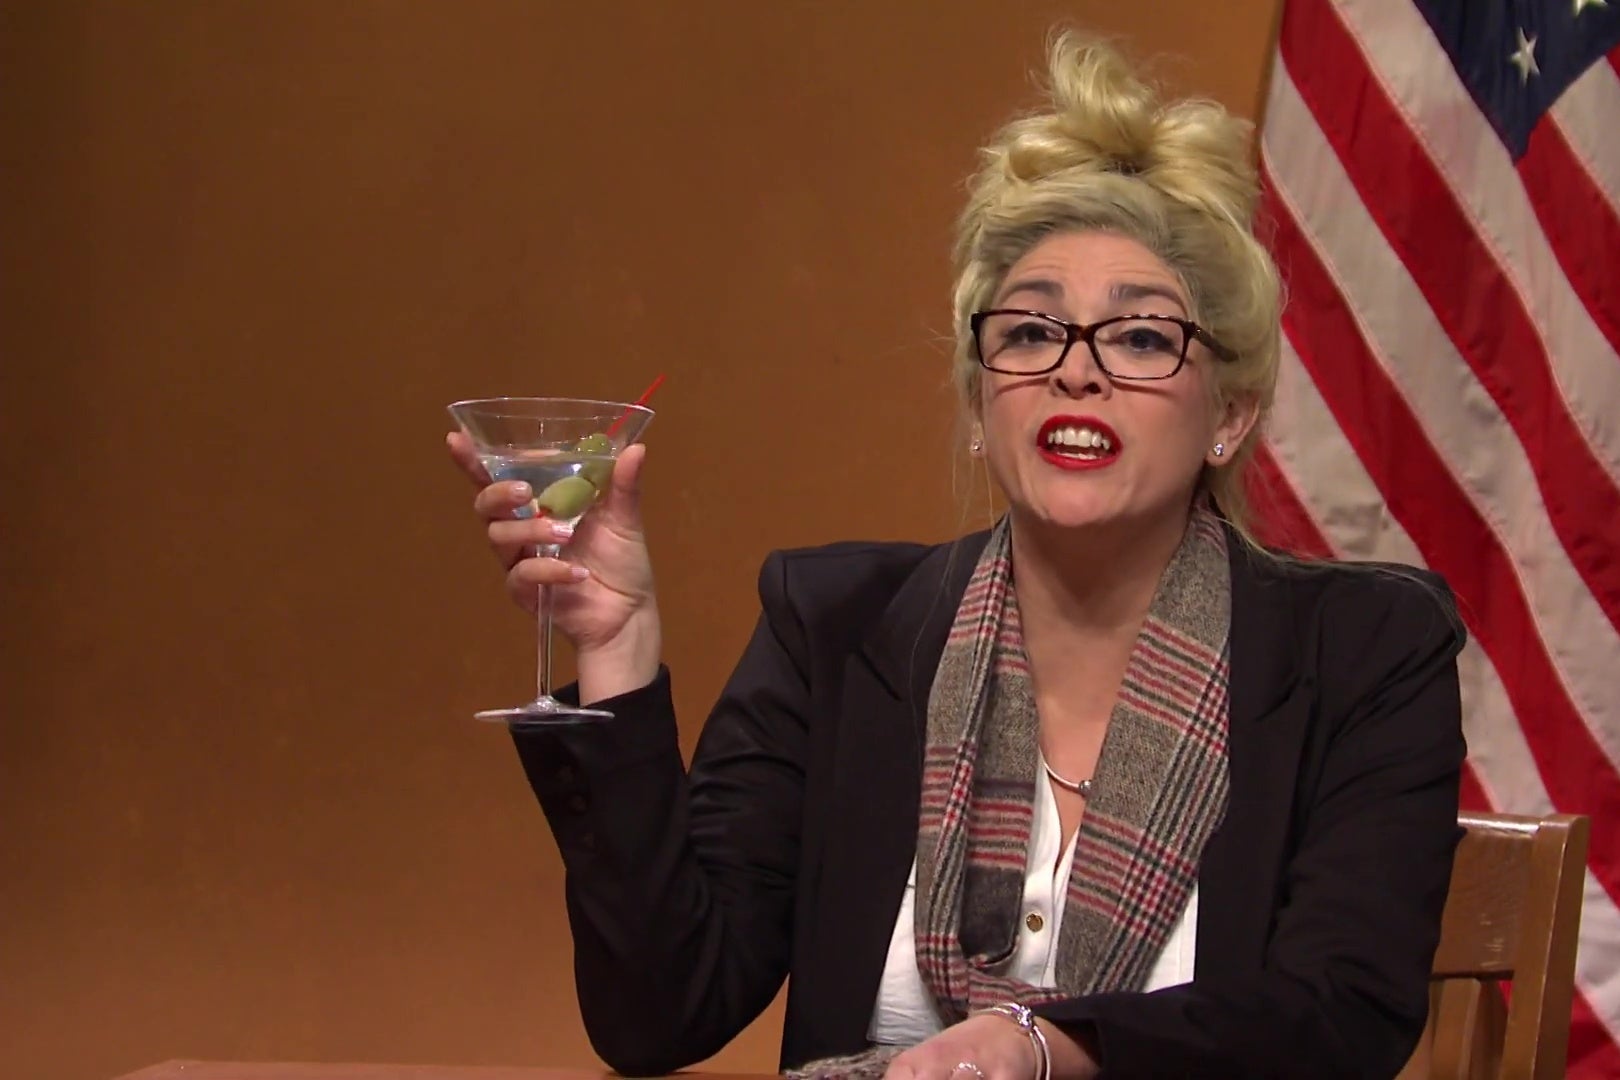 Cecily Strong, dressed as Melissa Carone, holding a martini, in a still from SNL.